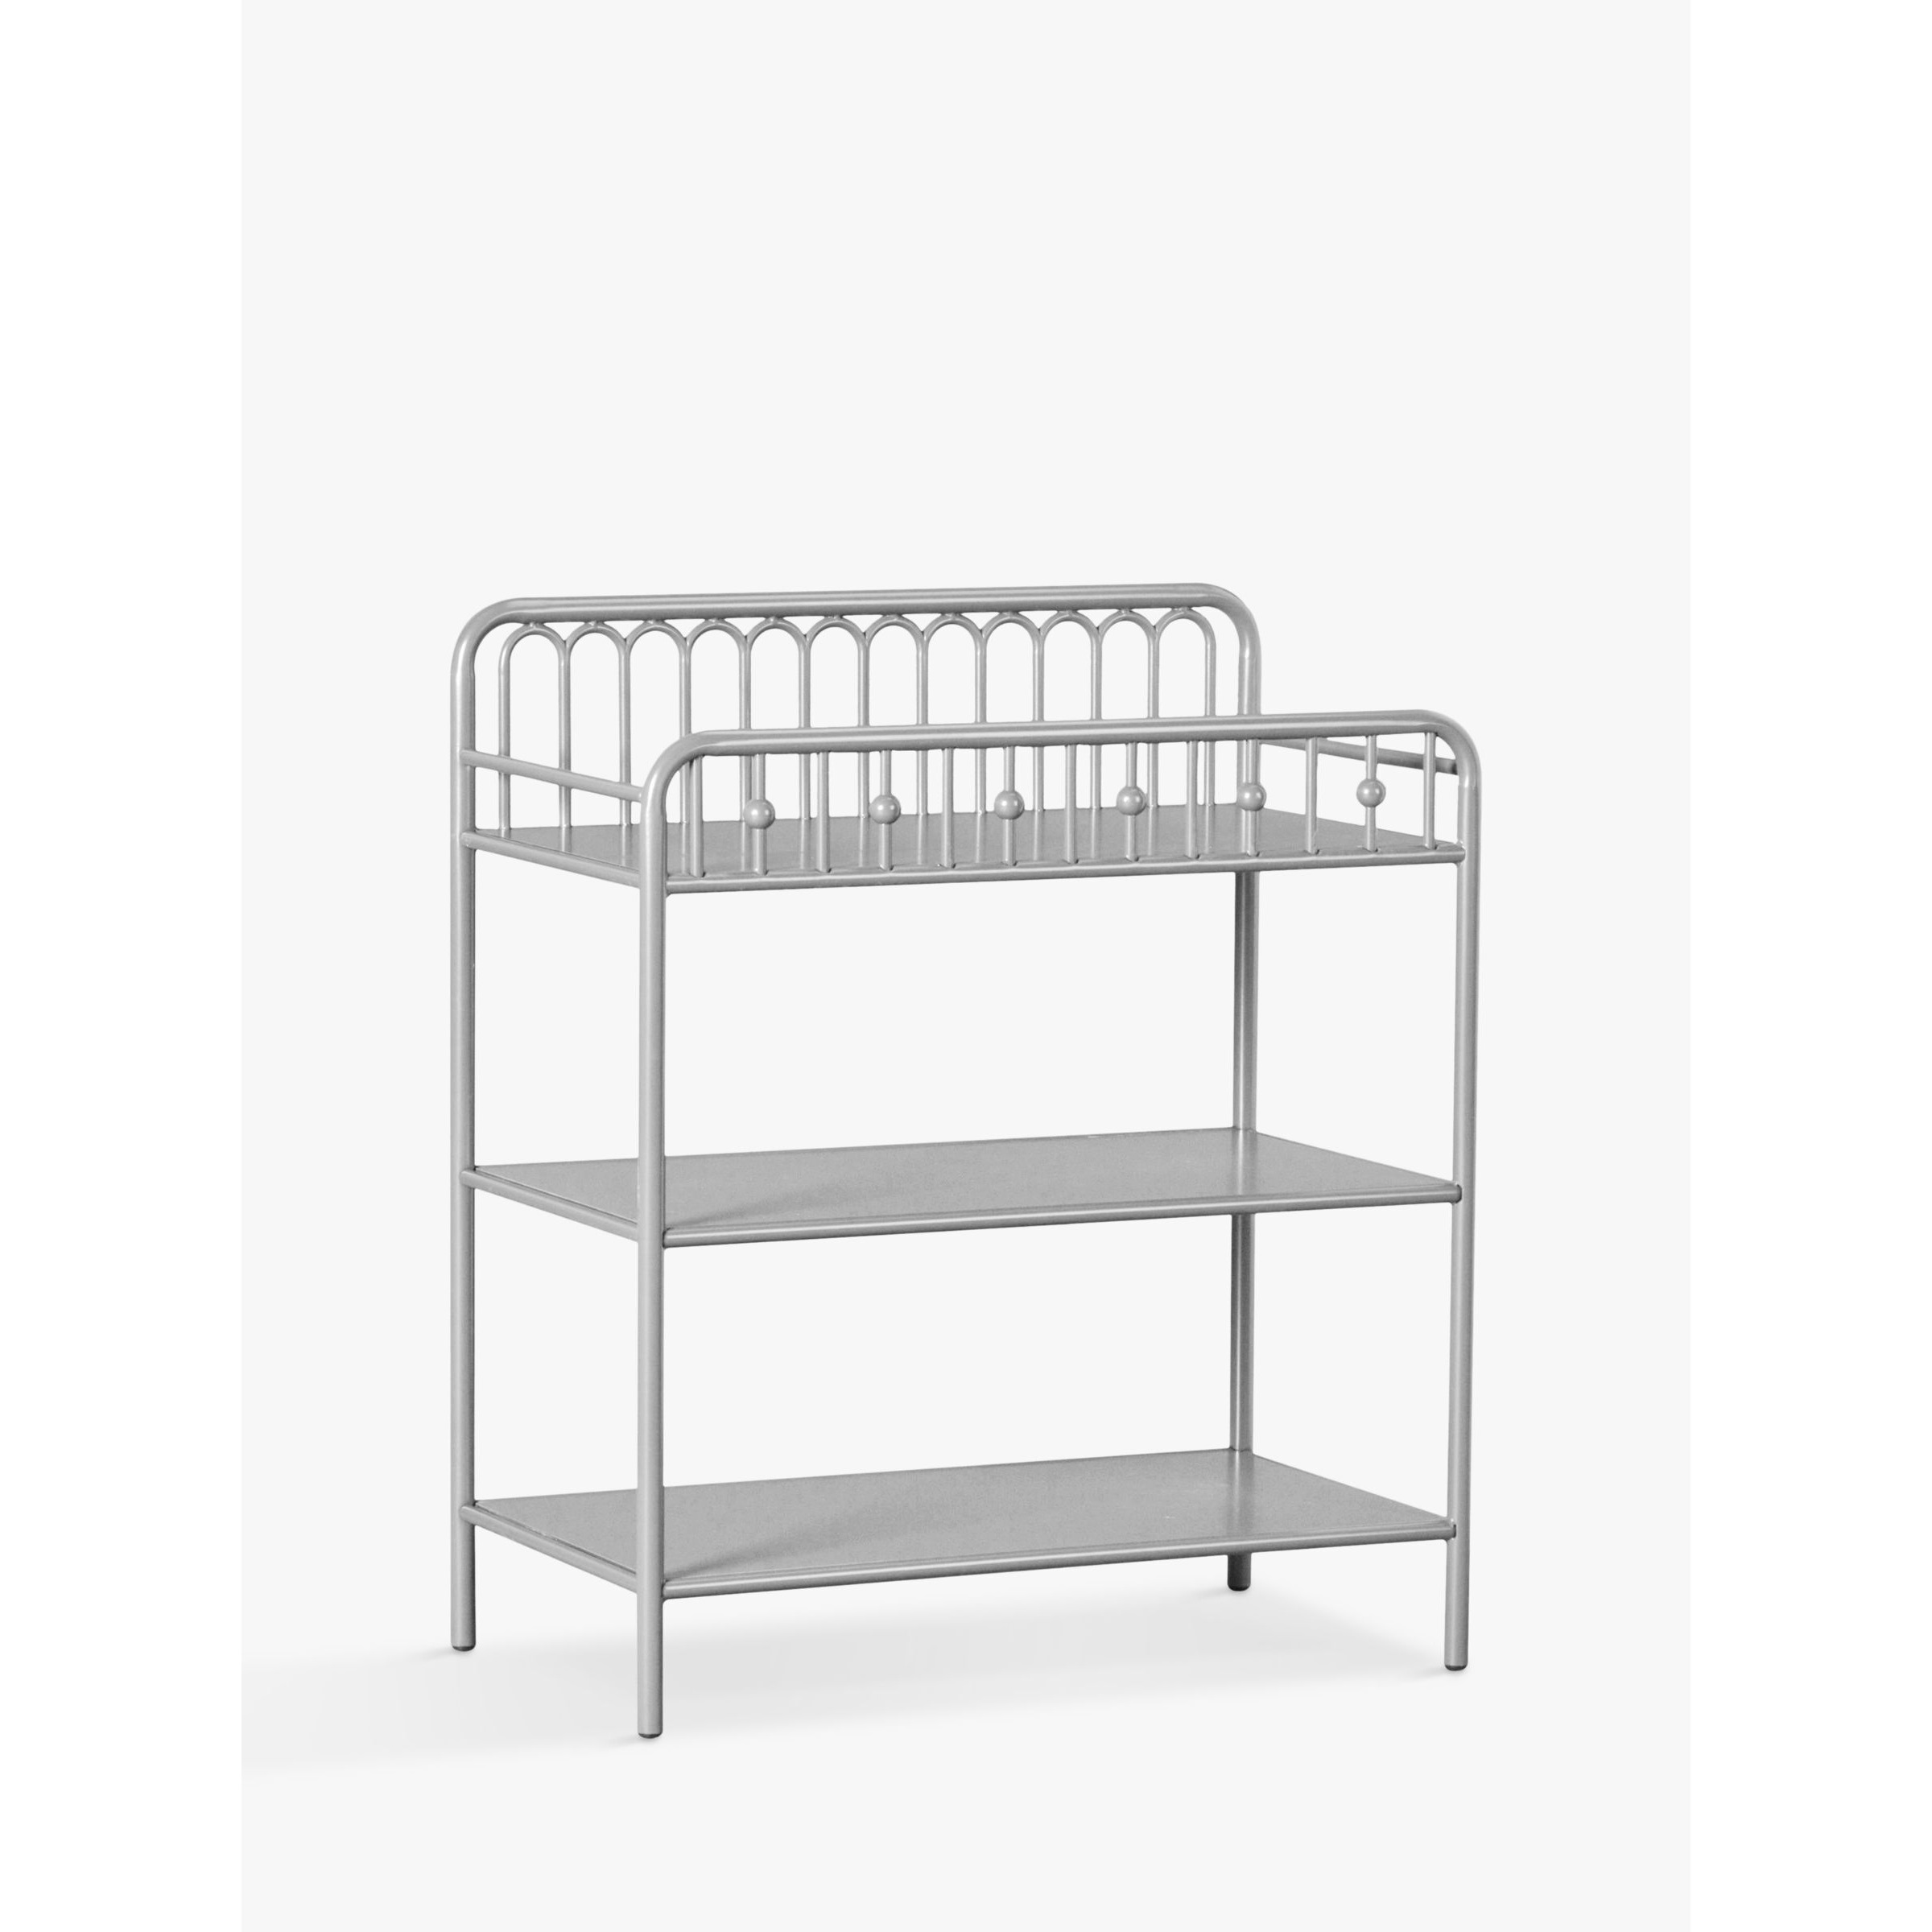 Little Seeds Monarch Hill Ivy Metal Changing Table - image 1